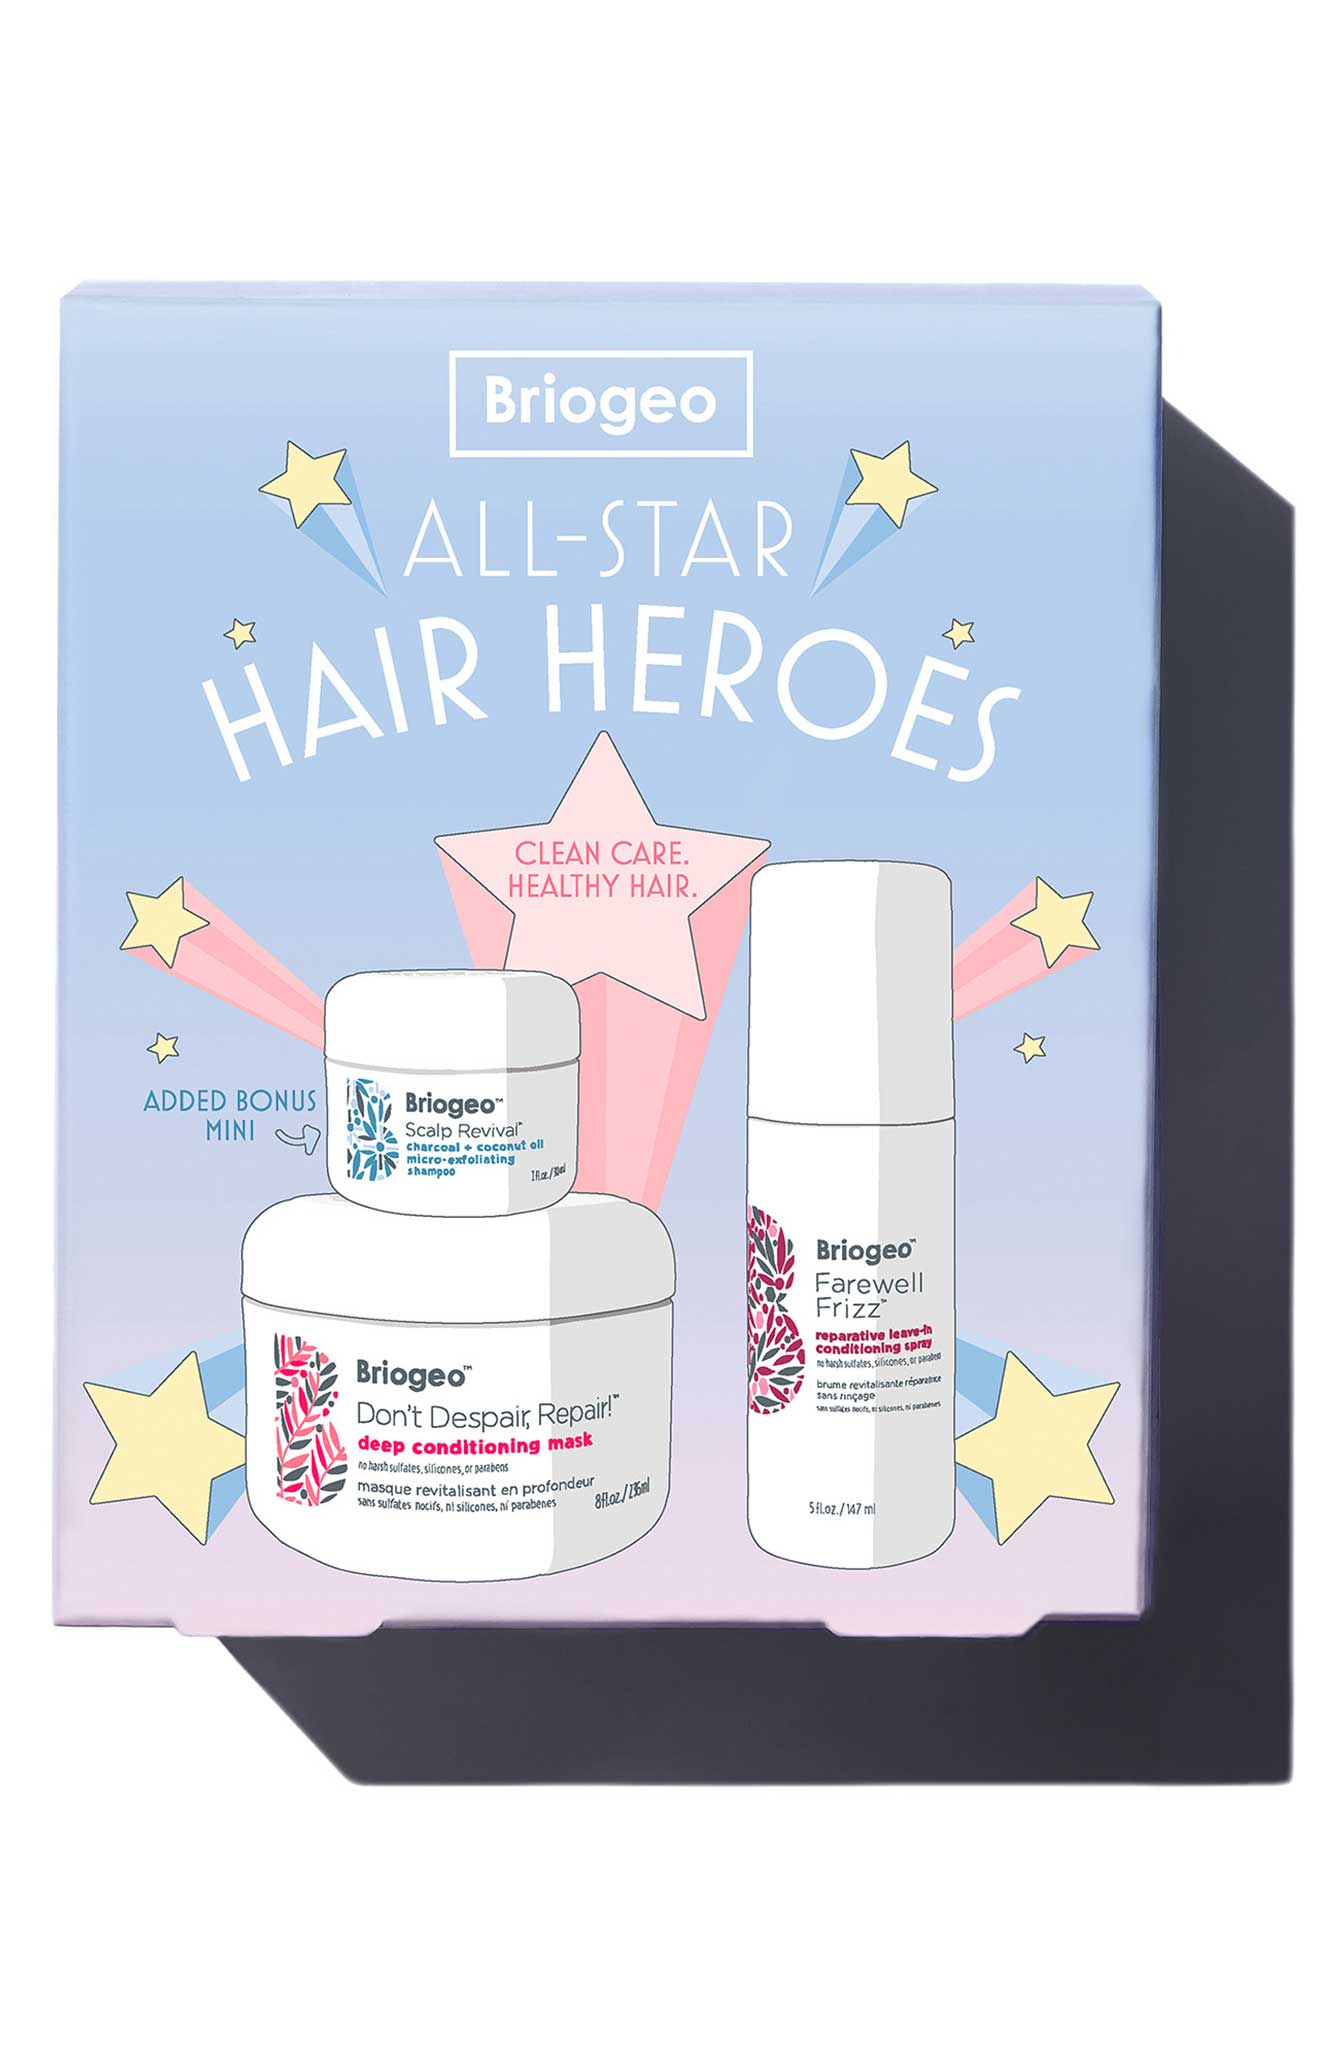 Briogeo All-Star Hair Heroes Set: I have FINALLY embraced my curls and part of the learning has been taking care of them with regular deep conditioning, scalp treatments and frizz control products. I love these all-natural products, so I know I am not putting any harsh chemicals in my hair!